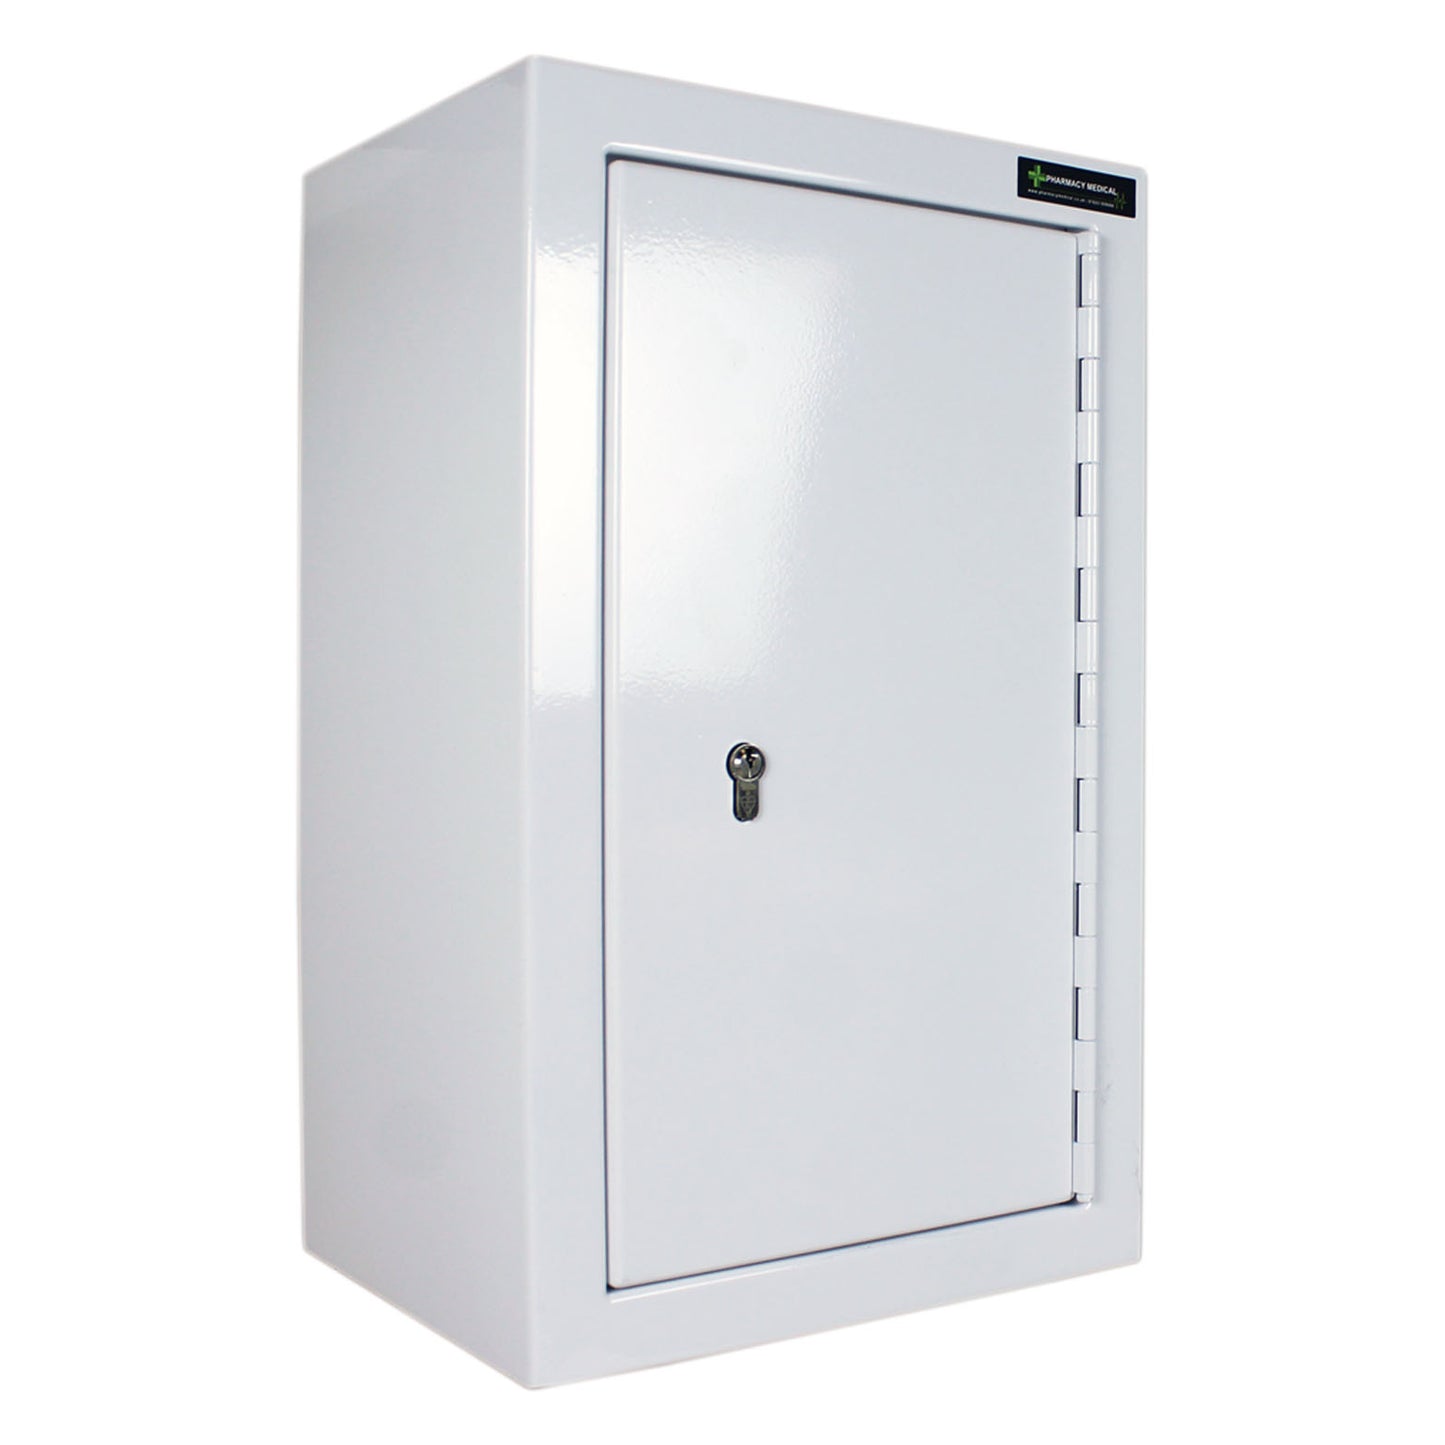 Pharmacy Medical - HECDC905 CONTROLLED DRUGS CABINET 500 X 300 X 270mm | 2 SHELVES (Adjustable) | Floor + Wall Fixing | R or L HINGE, optional warning light